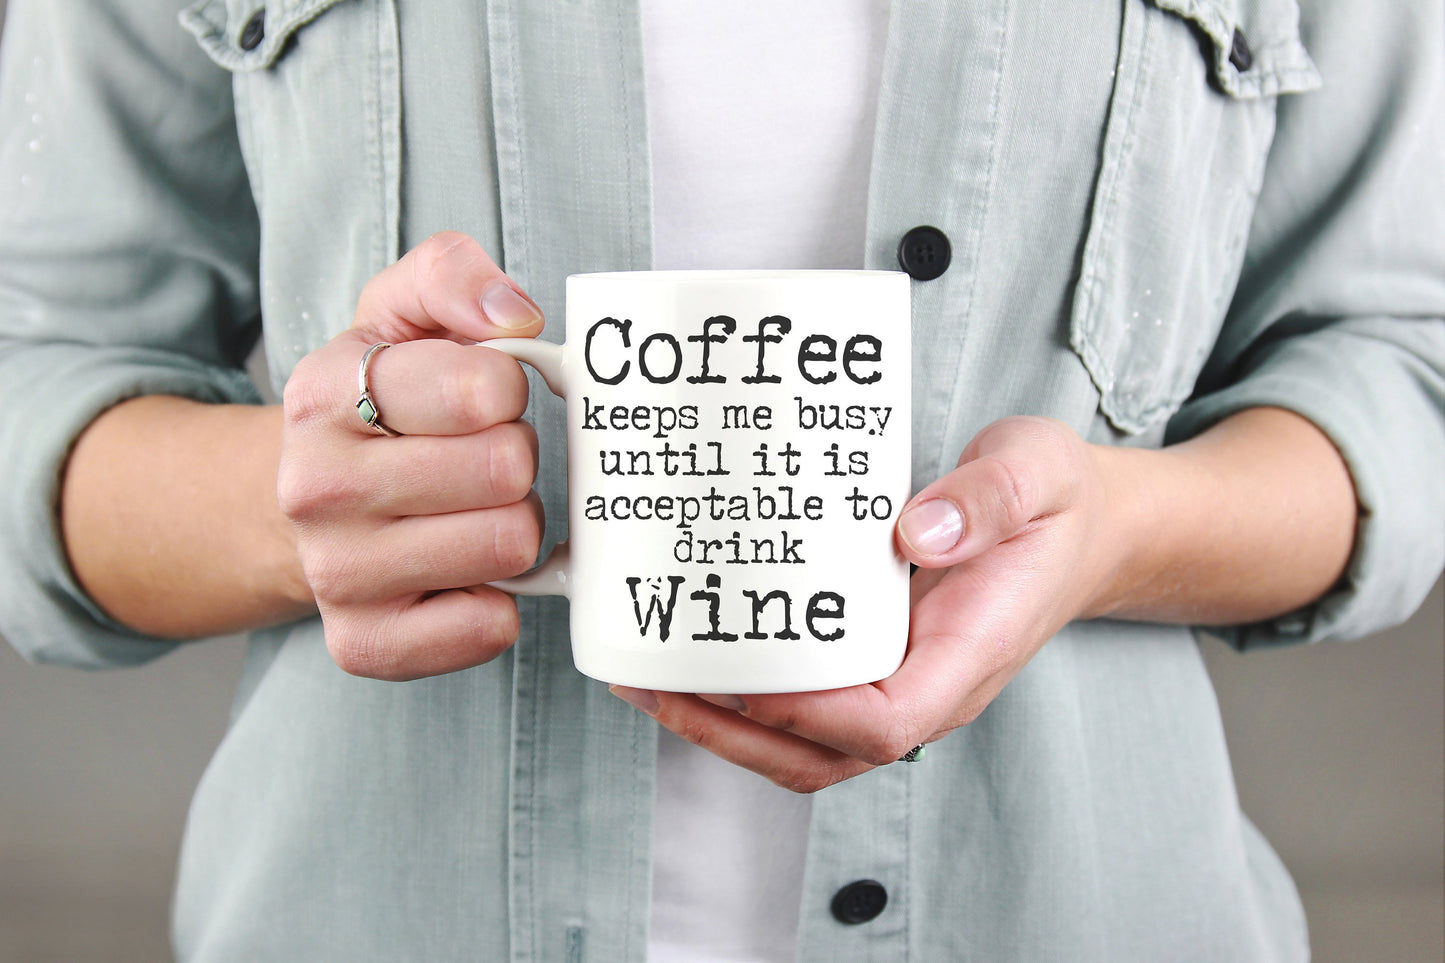 Coffee Keeps Me Busy Until It Is Acceptable To Drink Wine Mug - Funny Mugs, Wine Lover, Wine Lover Gift, Unique Mugs, Mug Quote, Coffee Mug